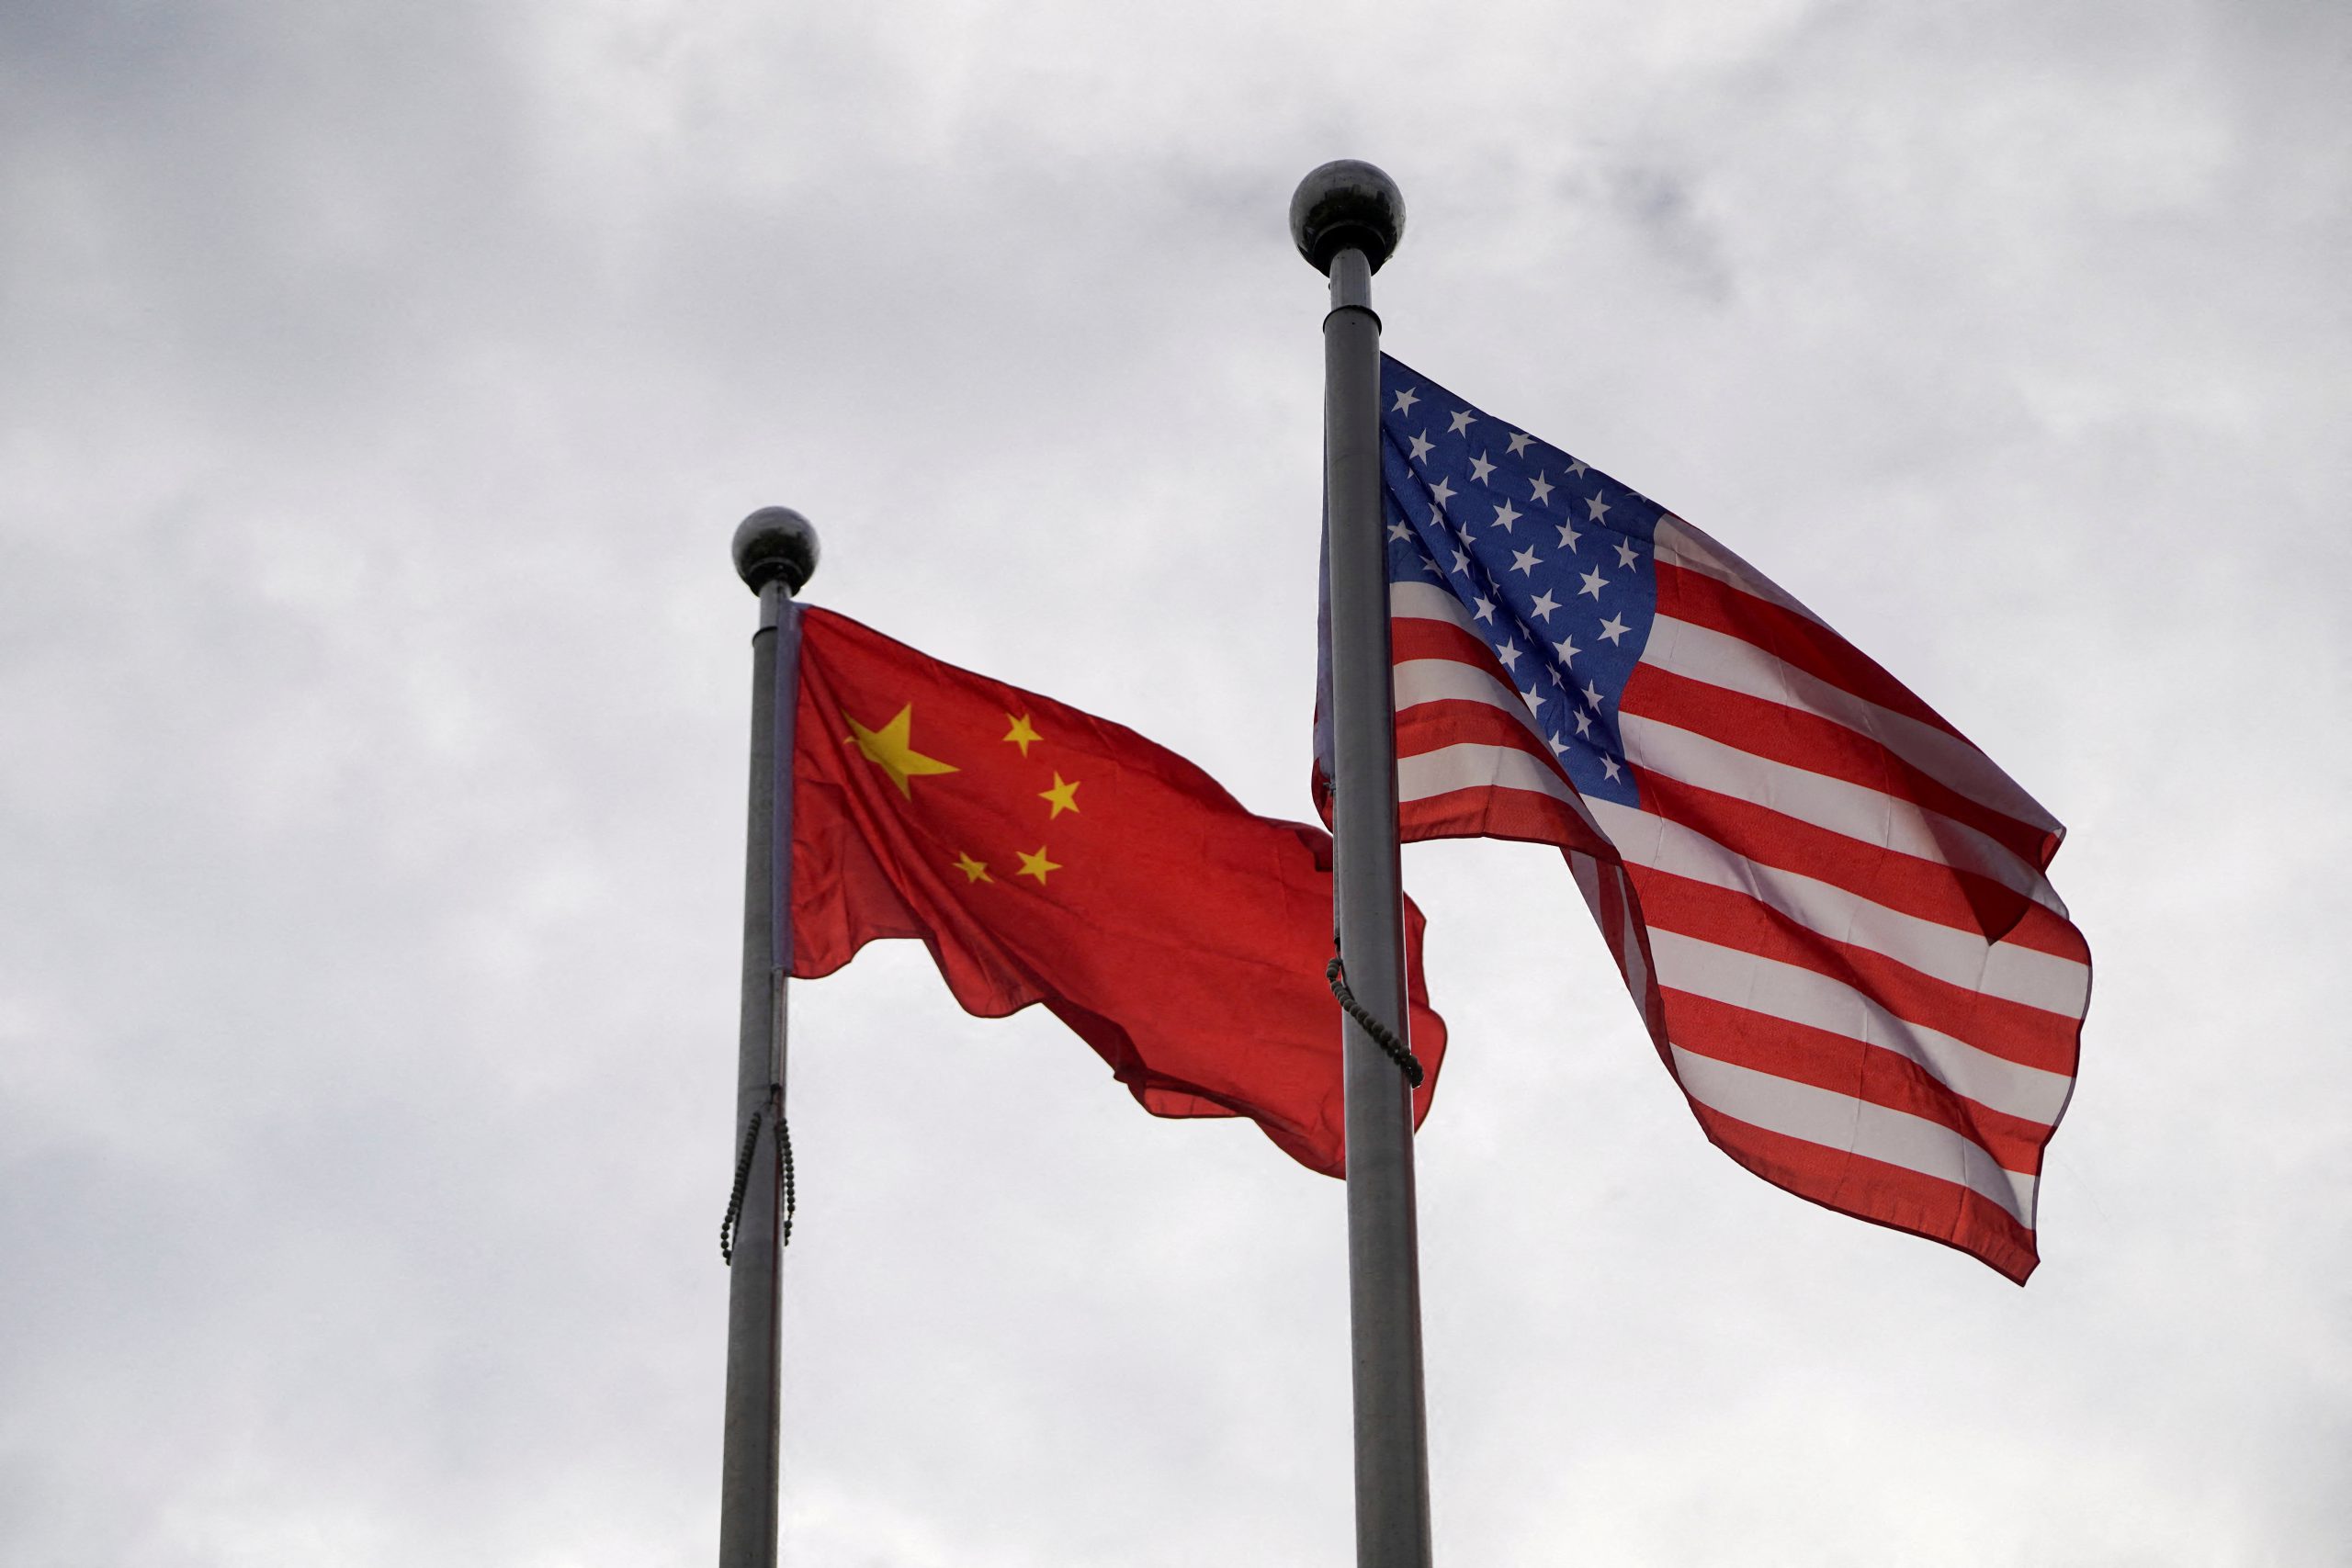 Chinese and U.S. flags flutter outside a company building in Shanghai, China November 16, 2021. REUTERS/Aly Song